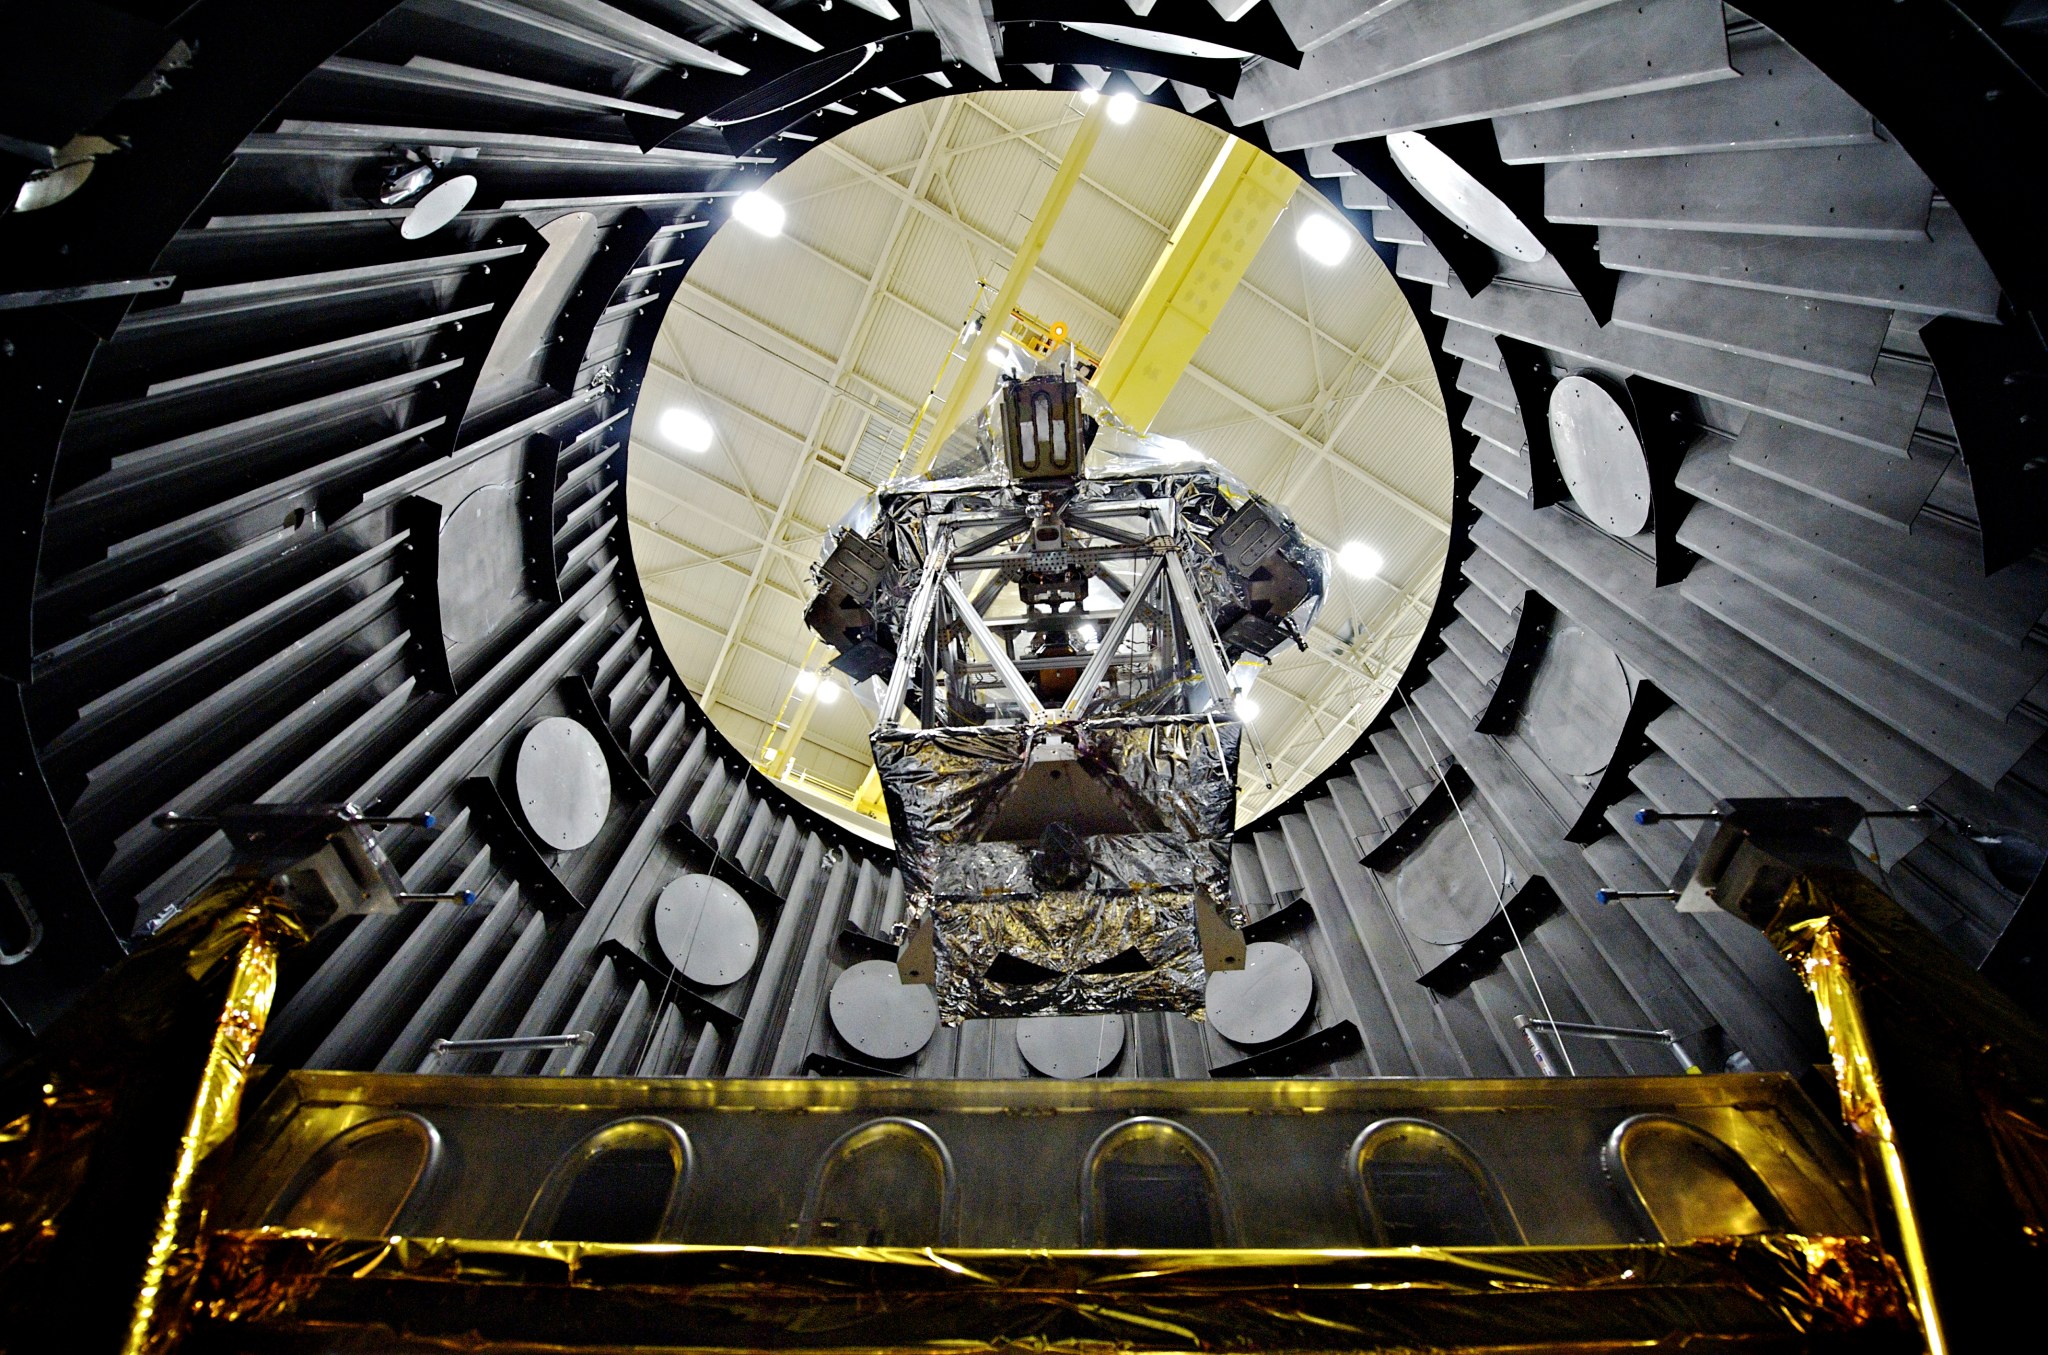 The Optical Telescope Element wrapped in a silver blanket